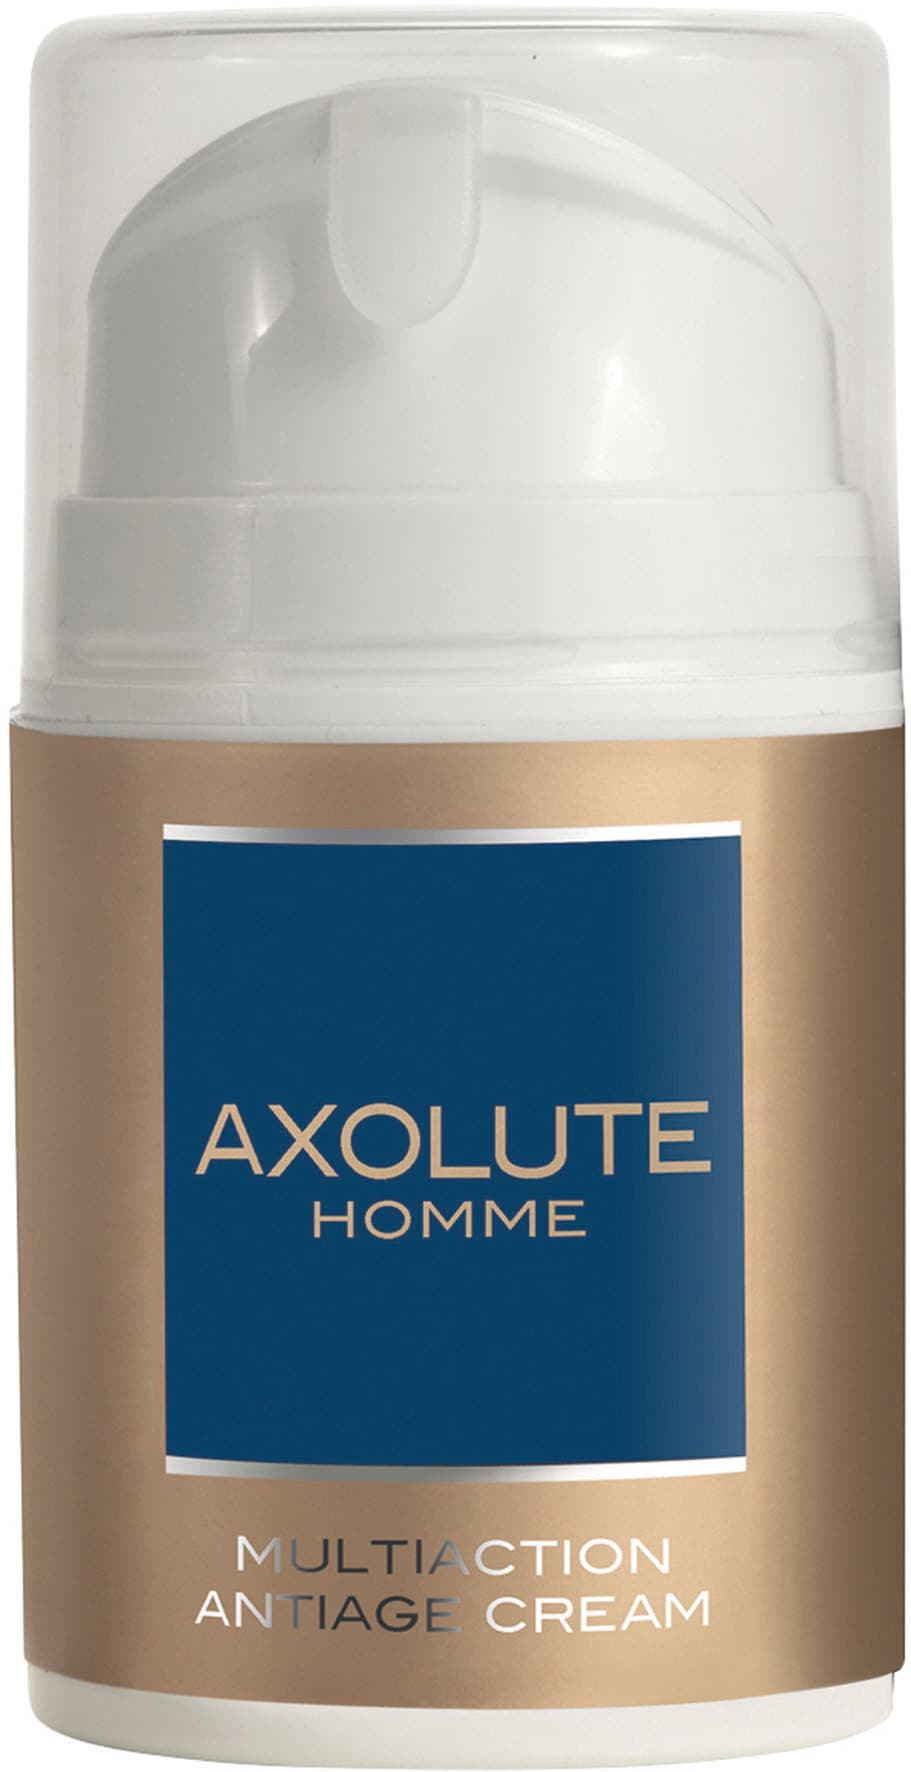 Anti-Aging-Creme »Axolute Homme«